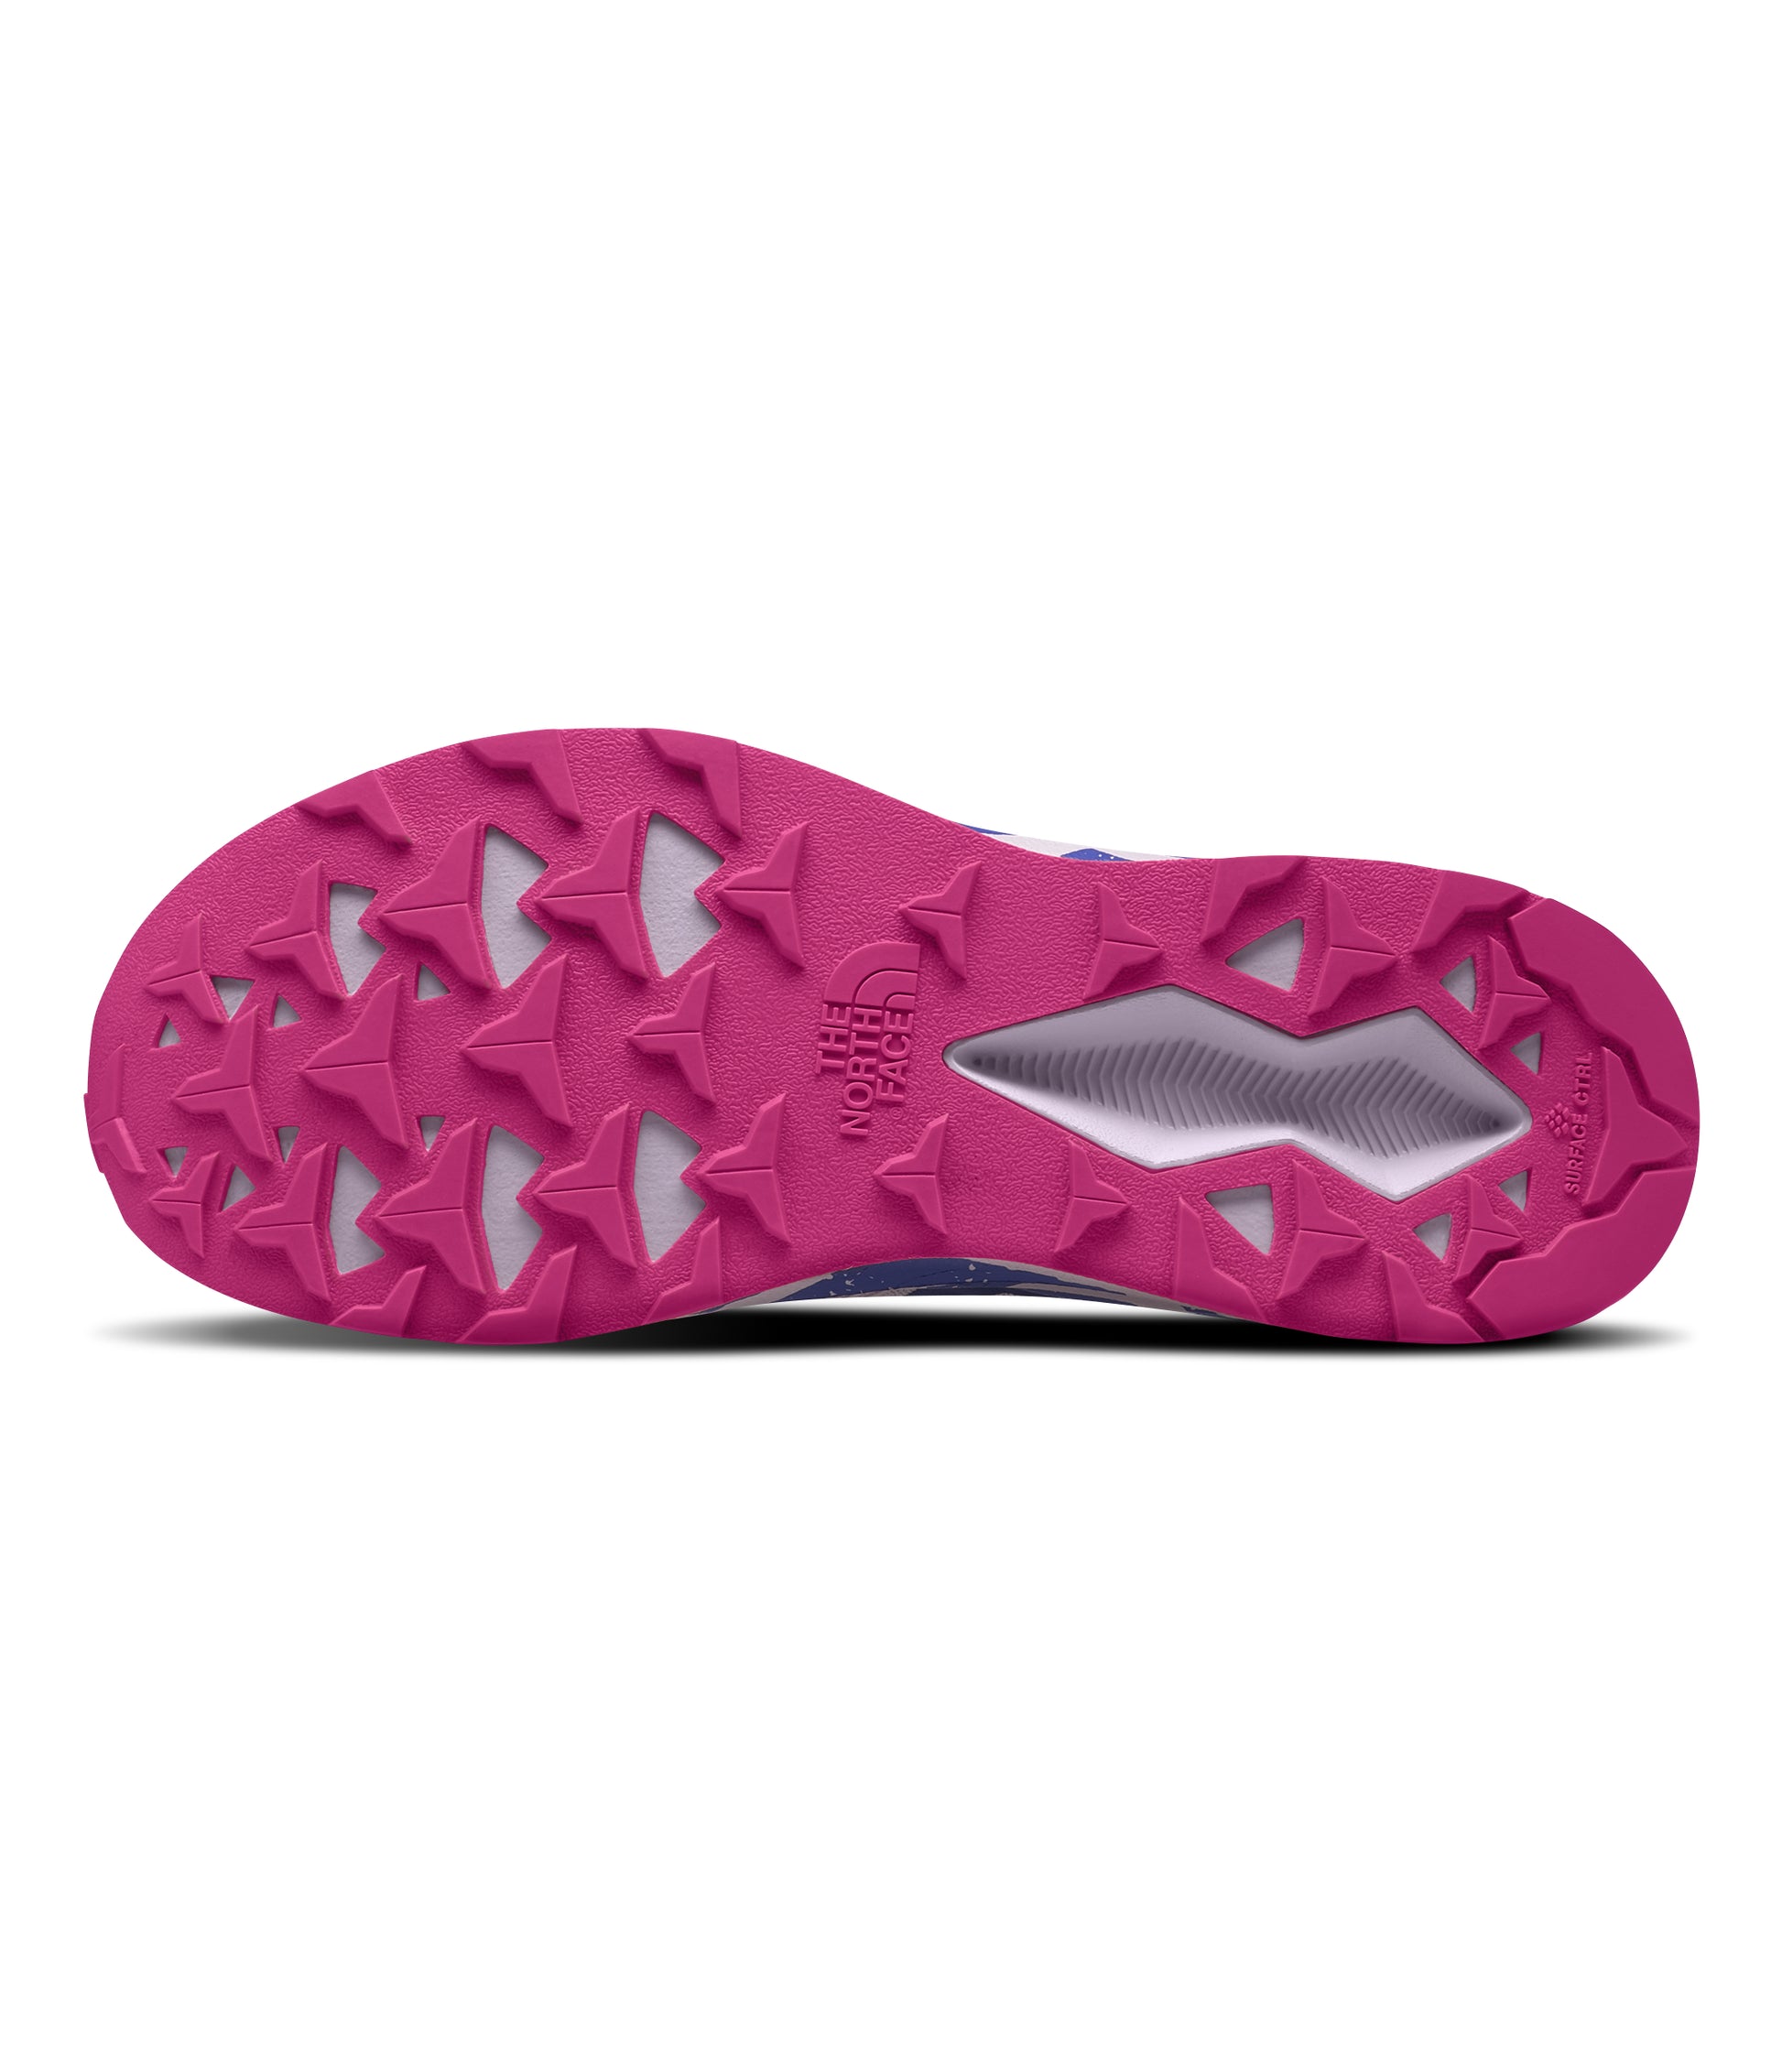 Zapatos The North Face Vectiv™ Eminus x Elvira Mujer | OA Colombia